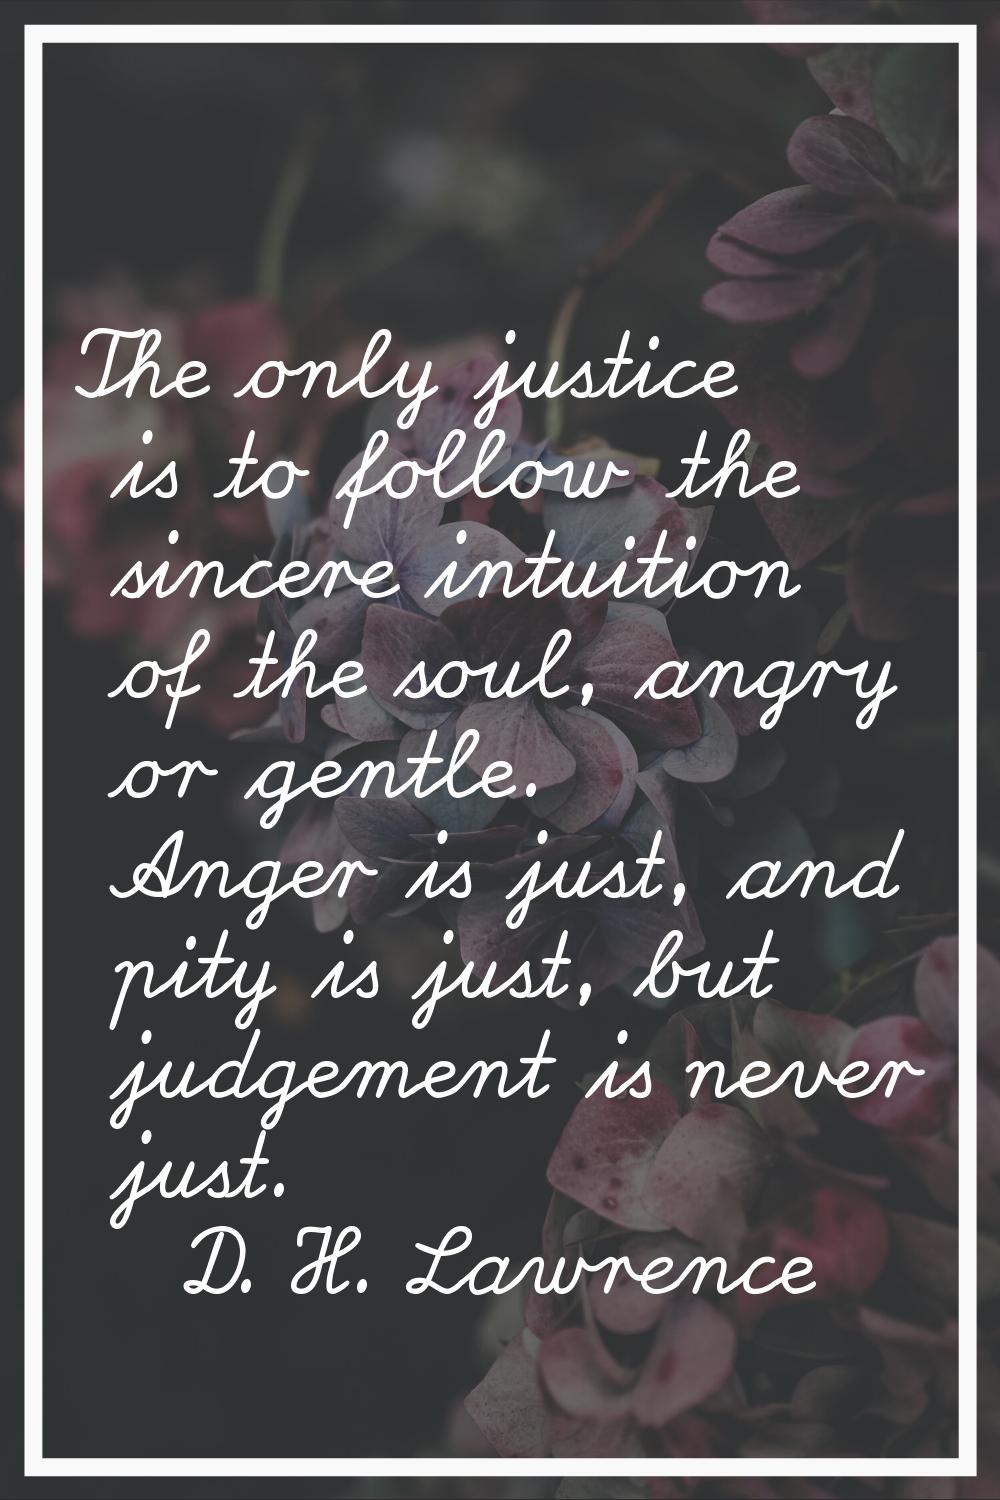 The only justice is to follow the sincere intuition of the soul, angry or gentle. Anger is just, an